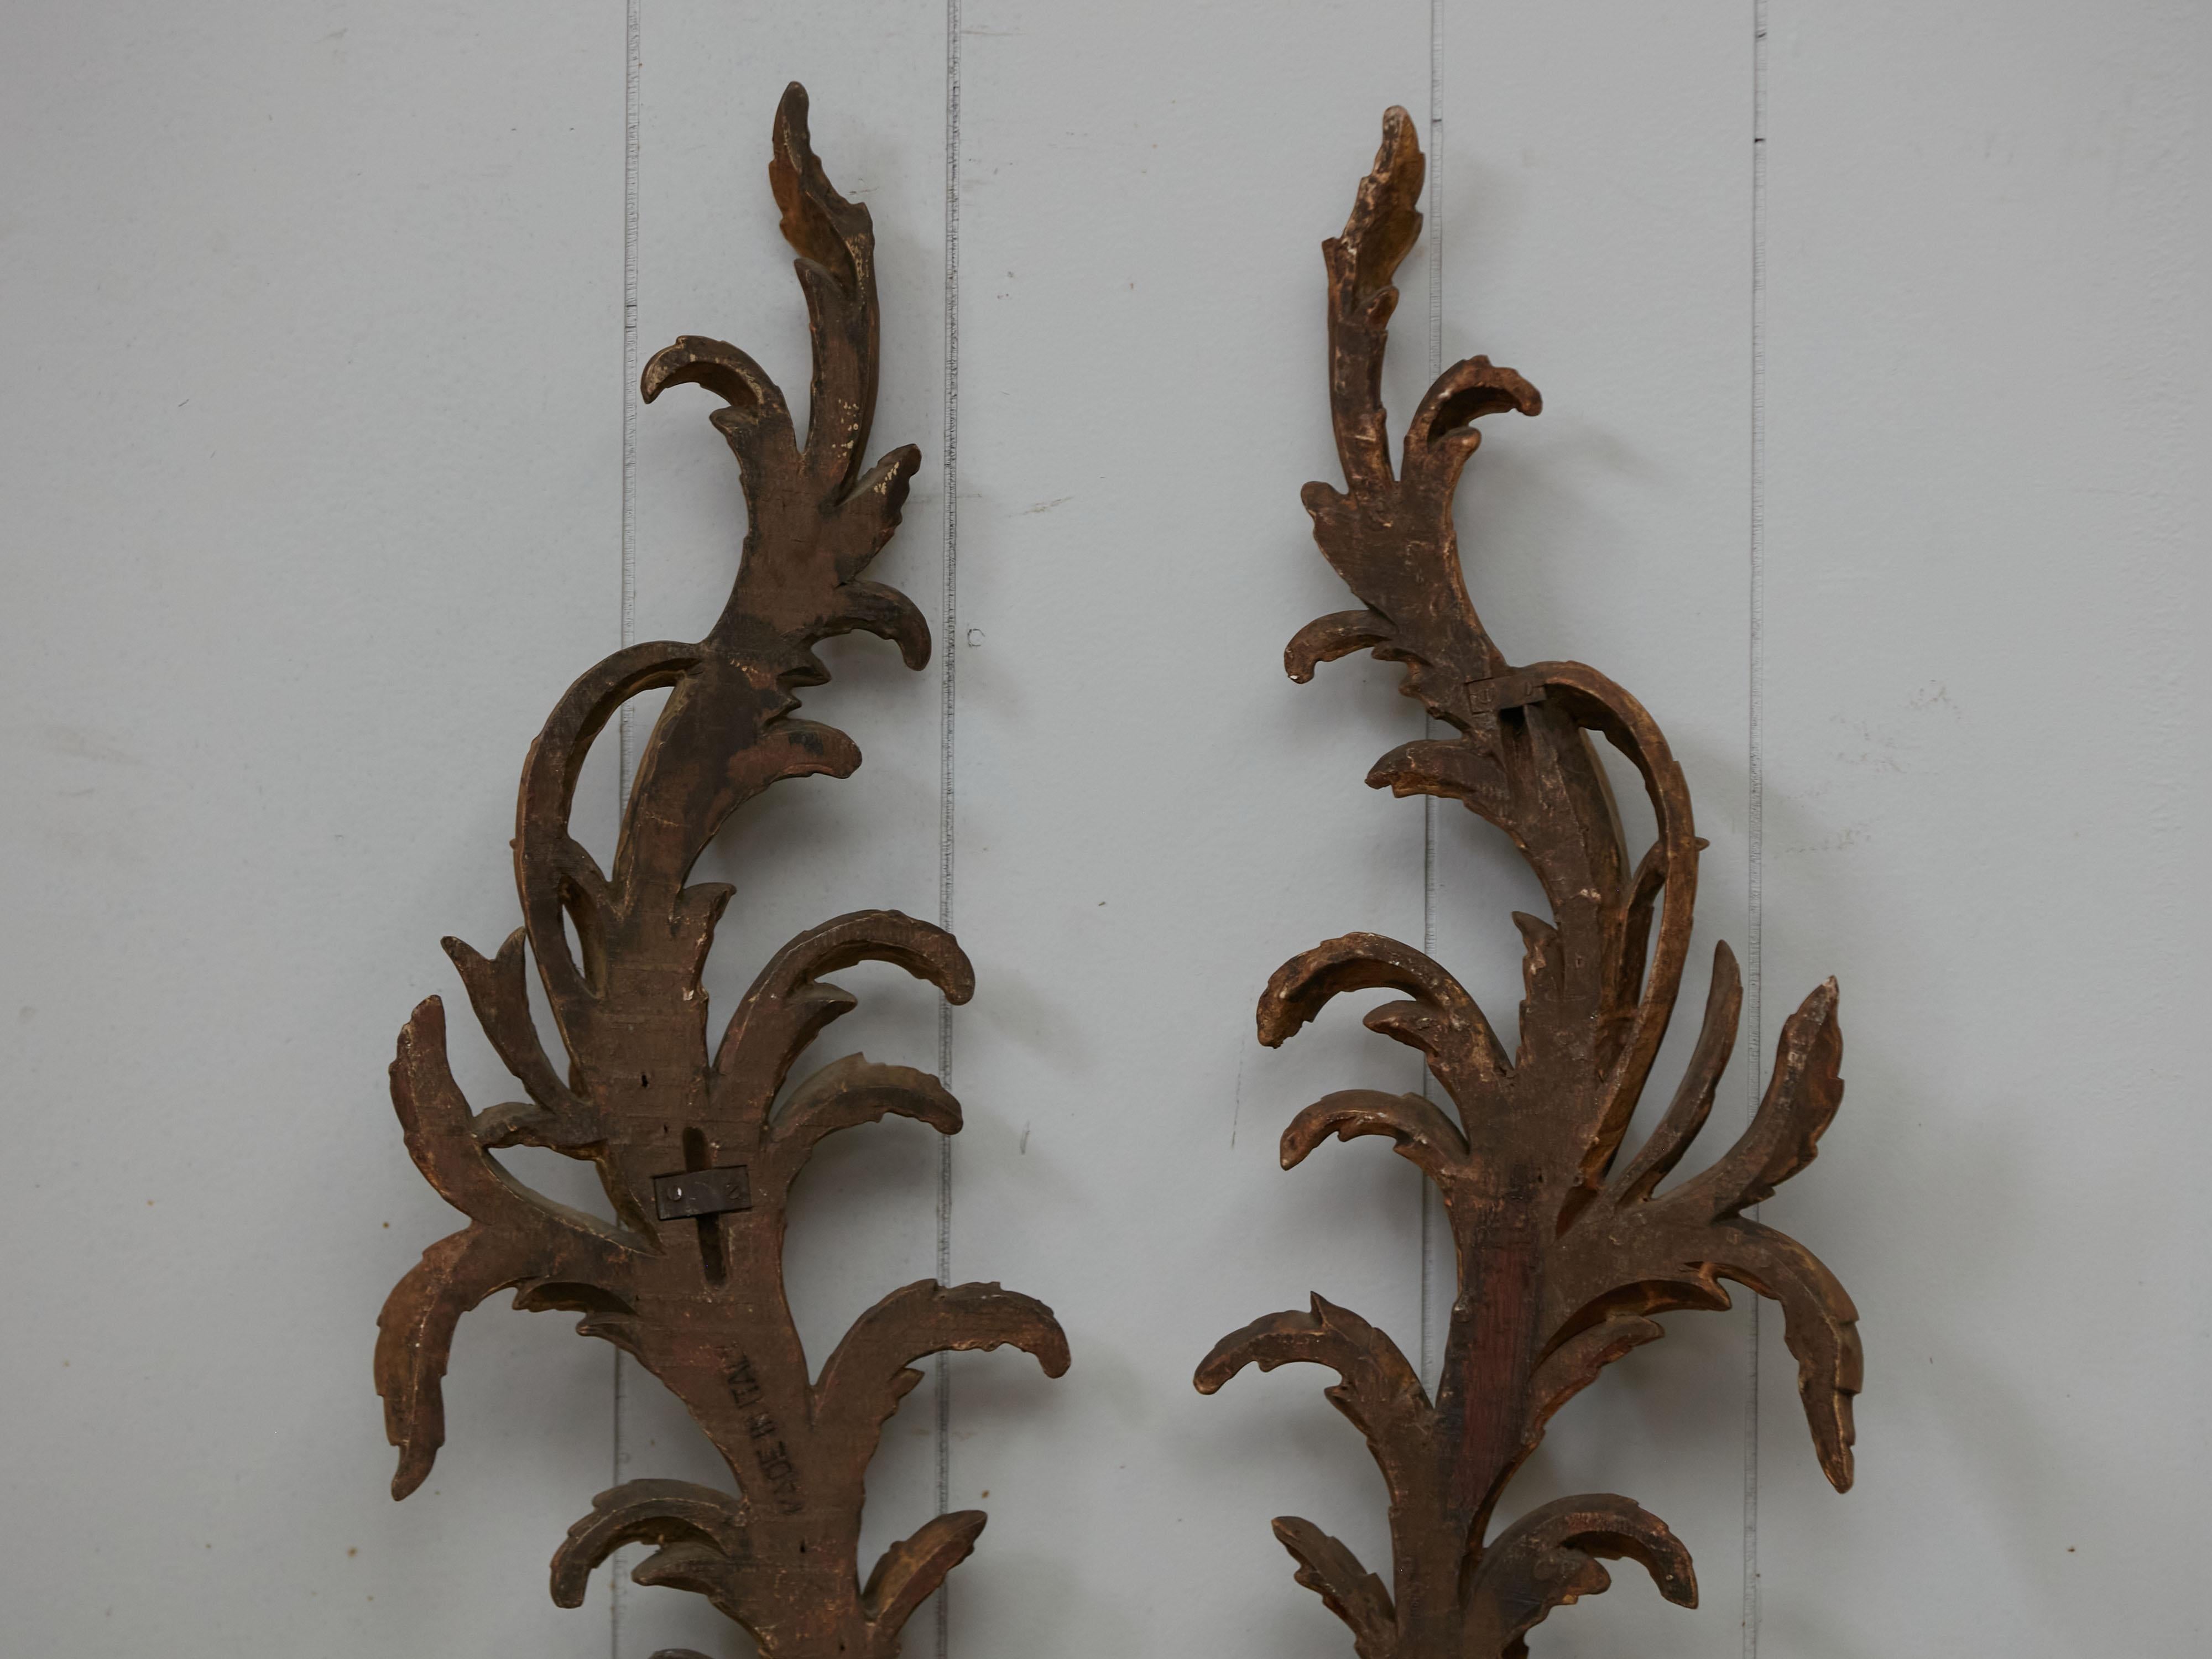 Pair of Italian 1820s Carved Giltwood Wall Fragments Depicting Scrolling Foliage For Sale 4